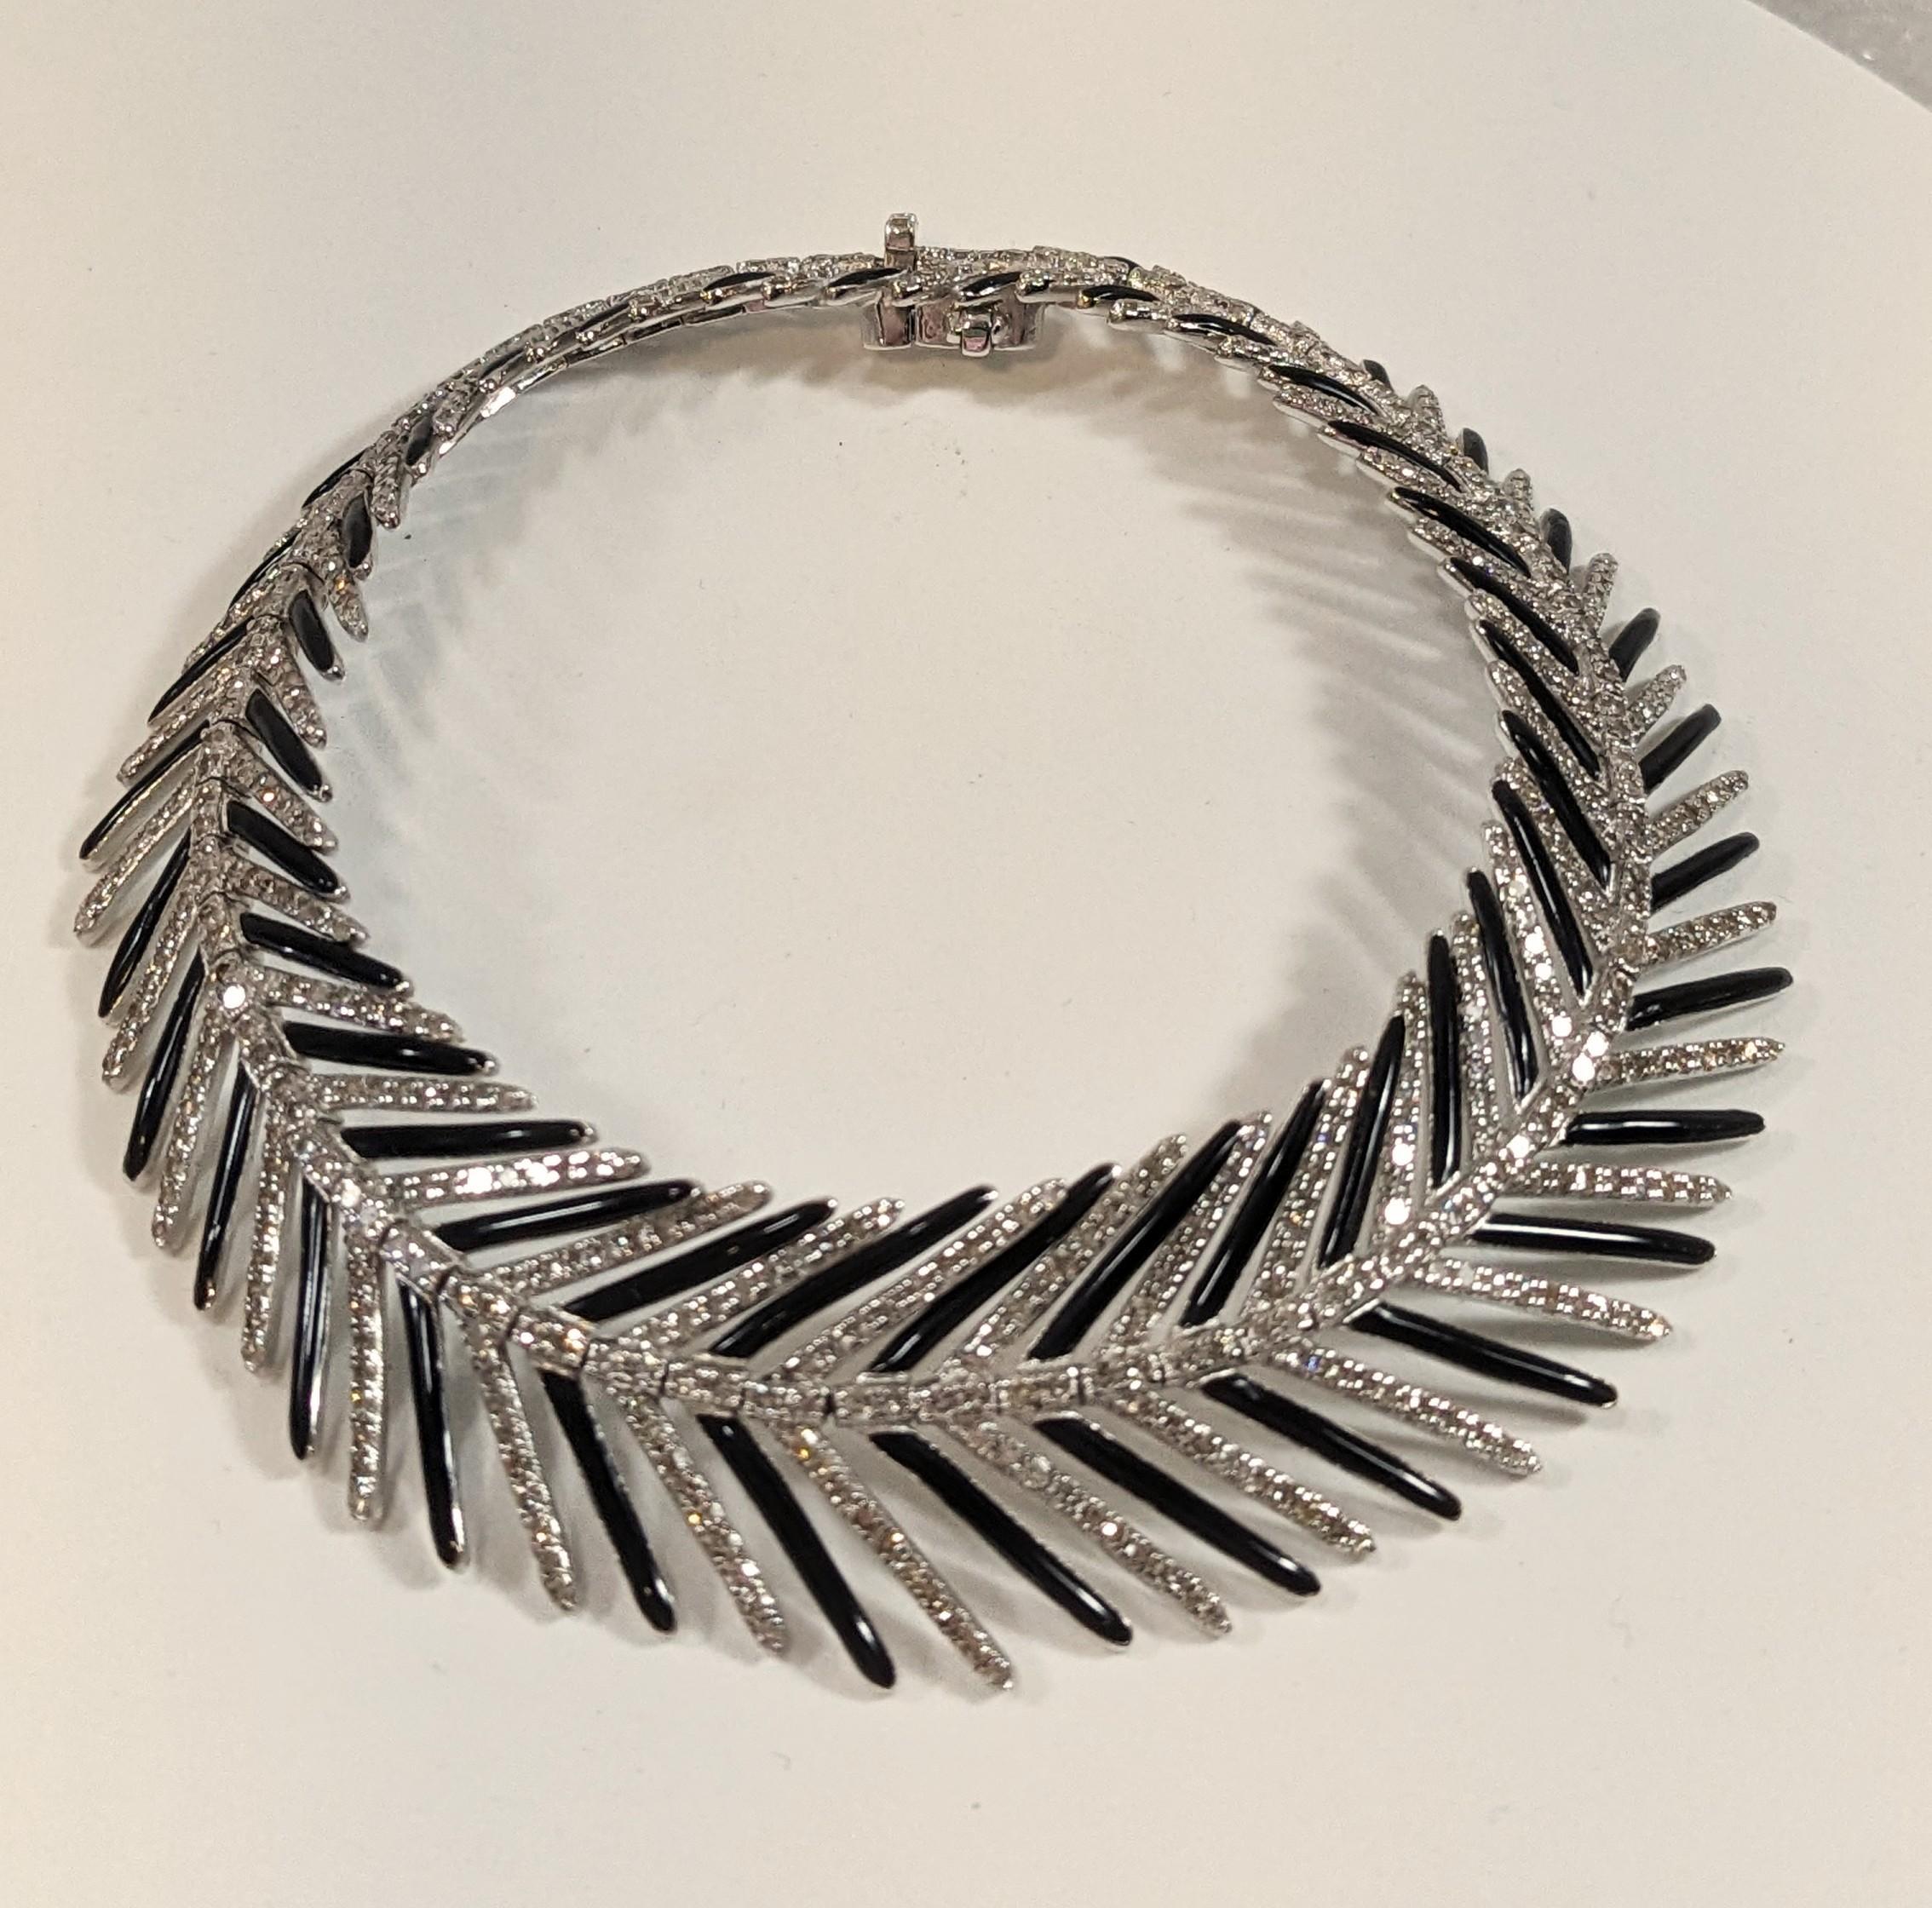 Feather Bracelet in 18k White Gold, Silver, Diamonds and Enamel

Bracelet in 18-carat gold with a total weight of 1.68 grams, silver with a total weight of 18.24 grams, diamonds with a total weight of 3.33 carats and black enamel

◘ Weight 20,59